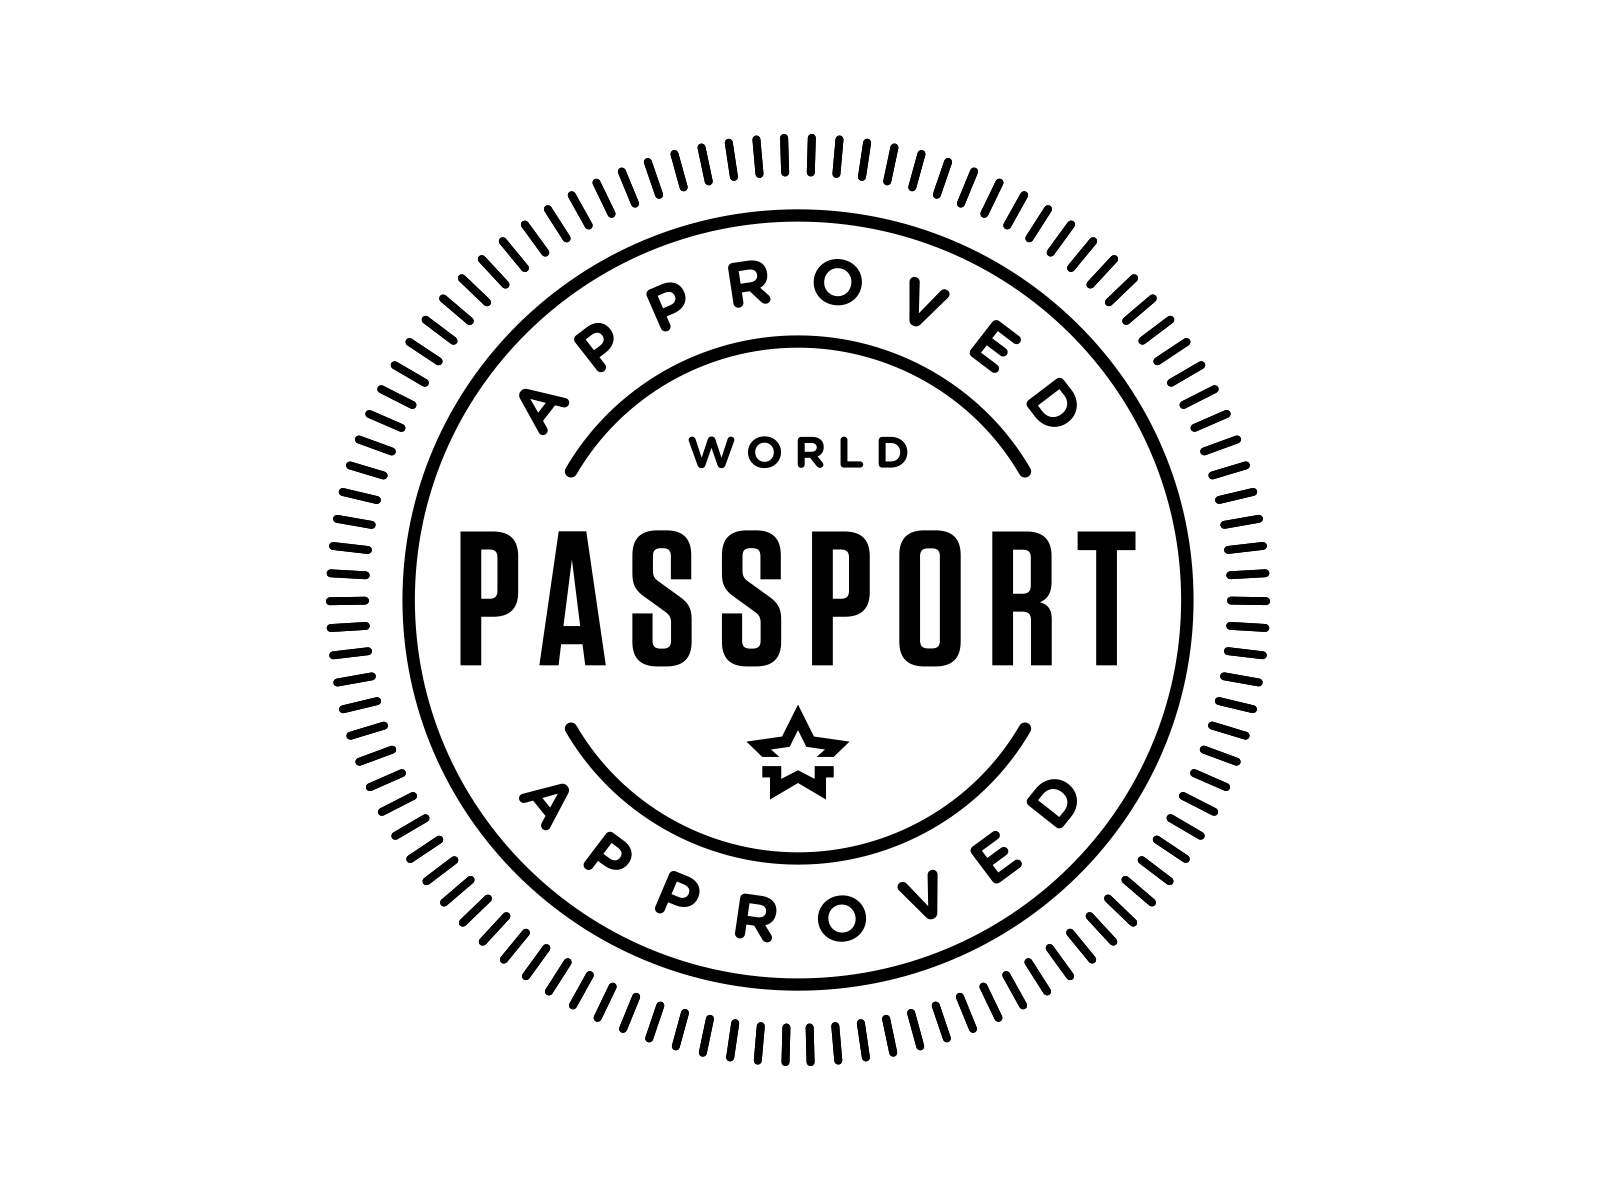 Approved Logo - Wunderpass | Passport Stamps | Passport stamps, Badge design, Travel ...